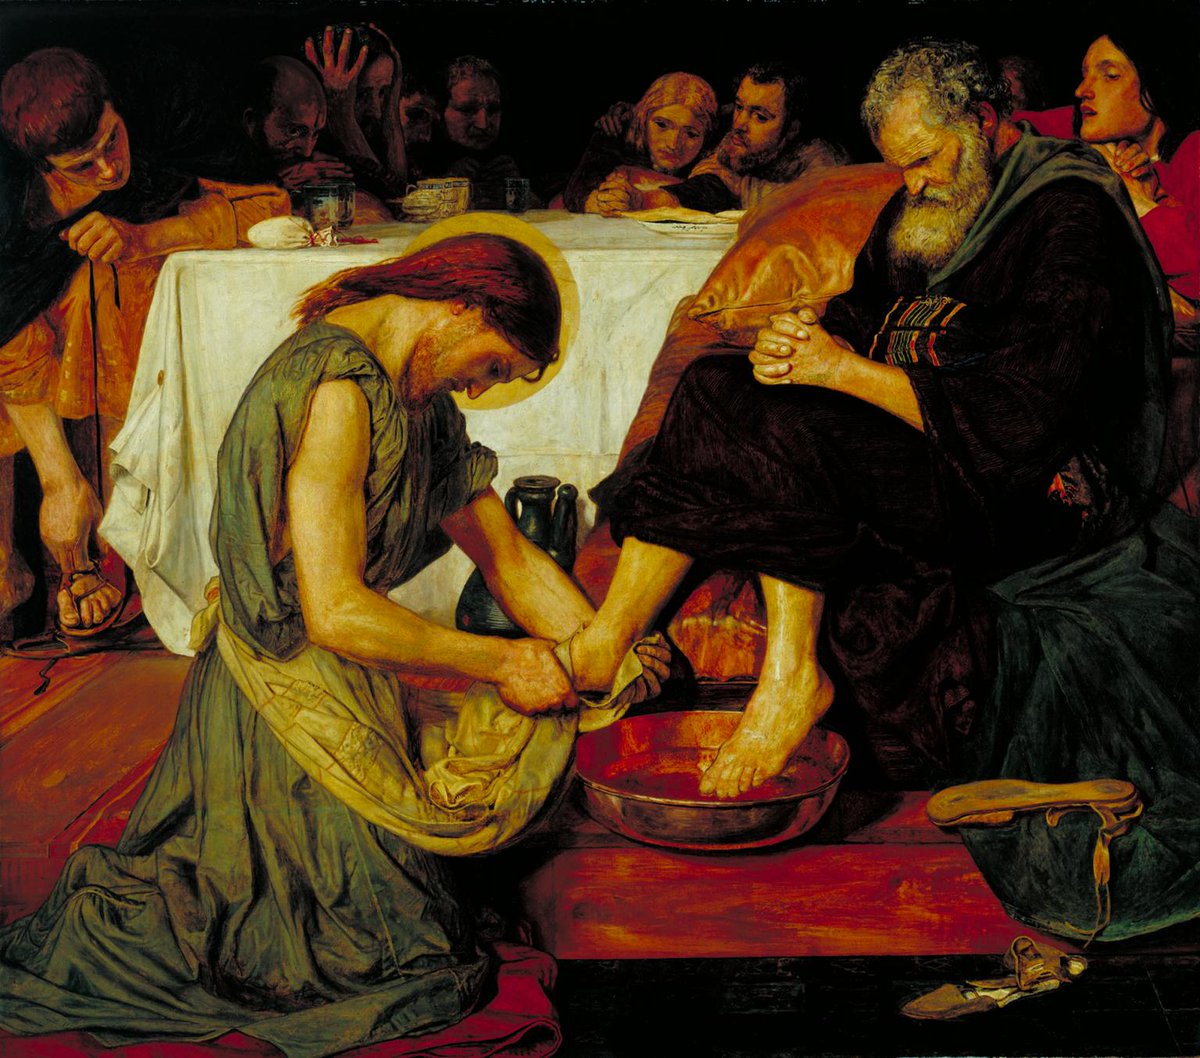 Whenever I hear the Gospel proclaimed on Holy Thursday, I never fail to think how different Christian churches would be if, in addition to our weekly celebrations of the Eucharist, we celebrated the Footwashing every week as well...